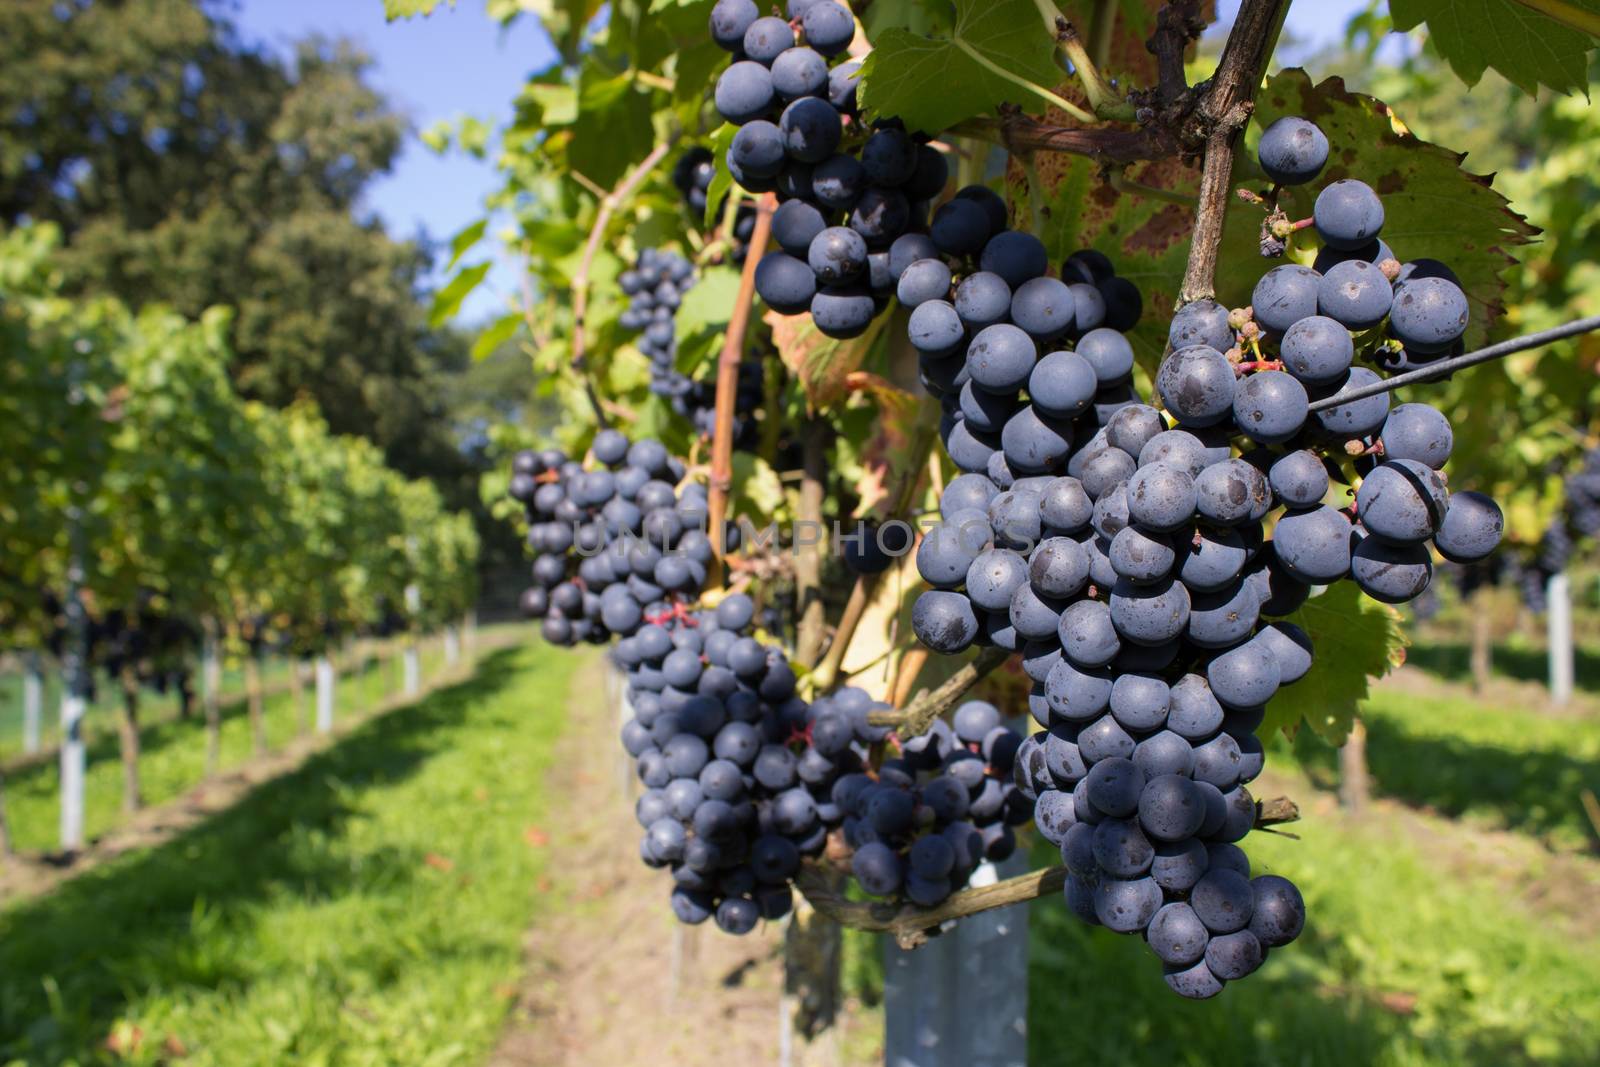 Bunch of blue grapes as hanging fruit near path in vineyard